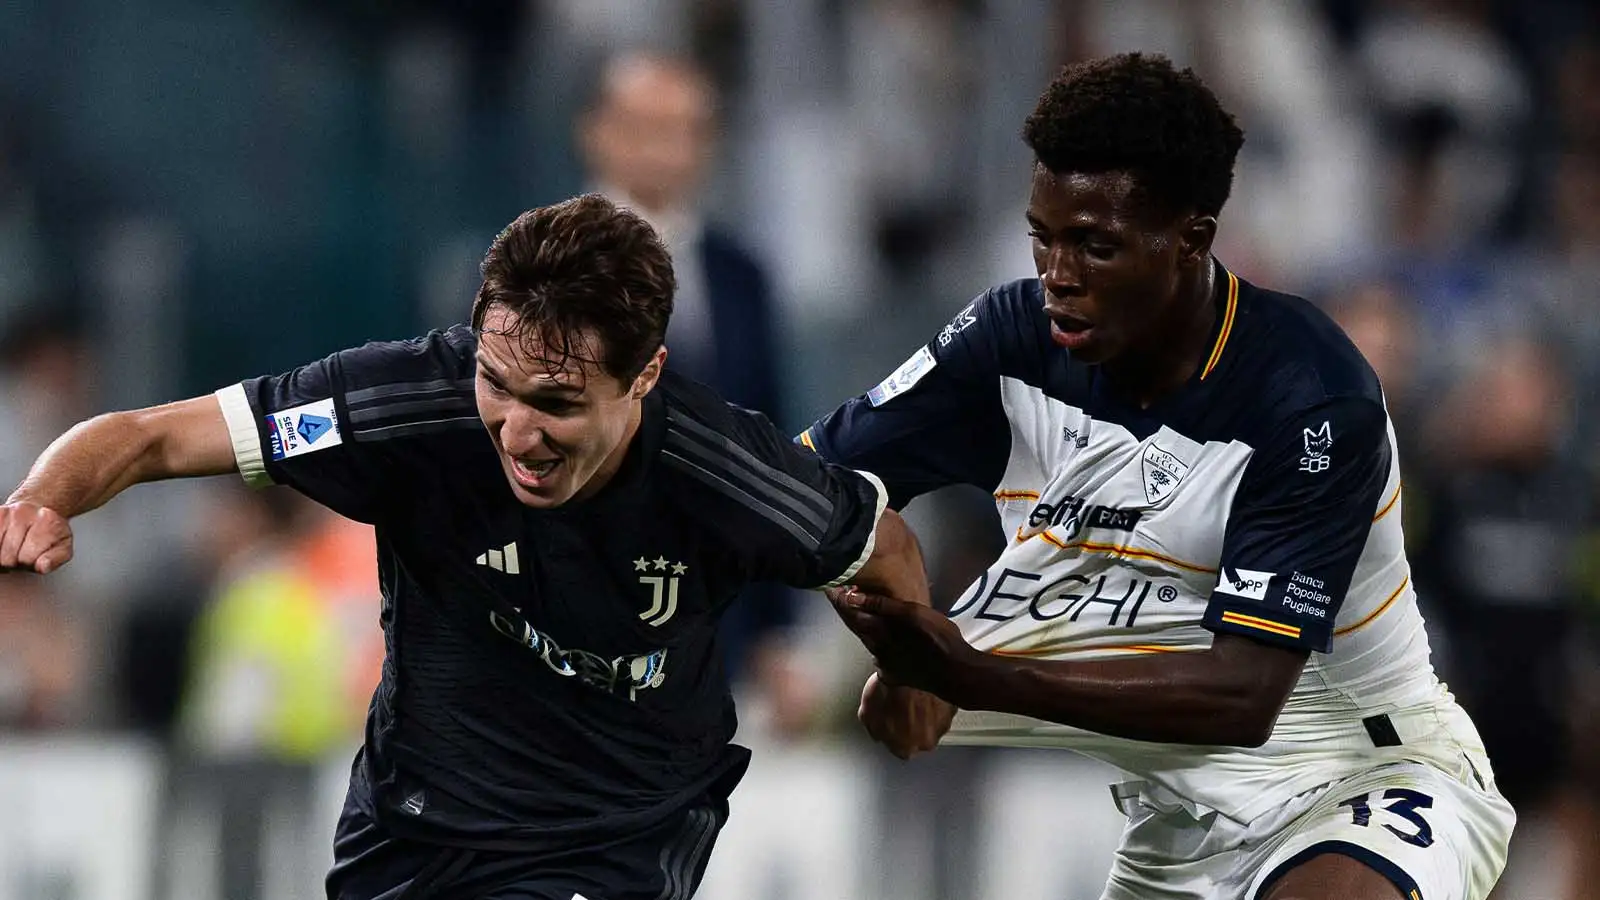 Federico Chiesa of Juventus FC competes for the sphere with Patrick Dorgu of US Lecce